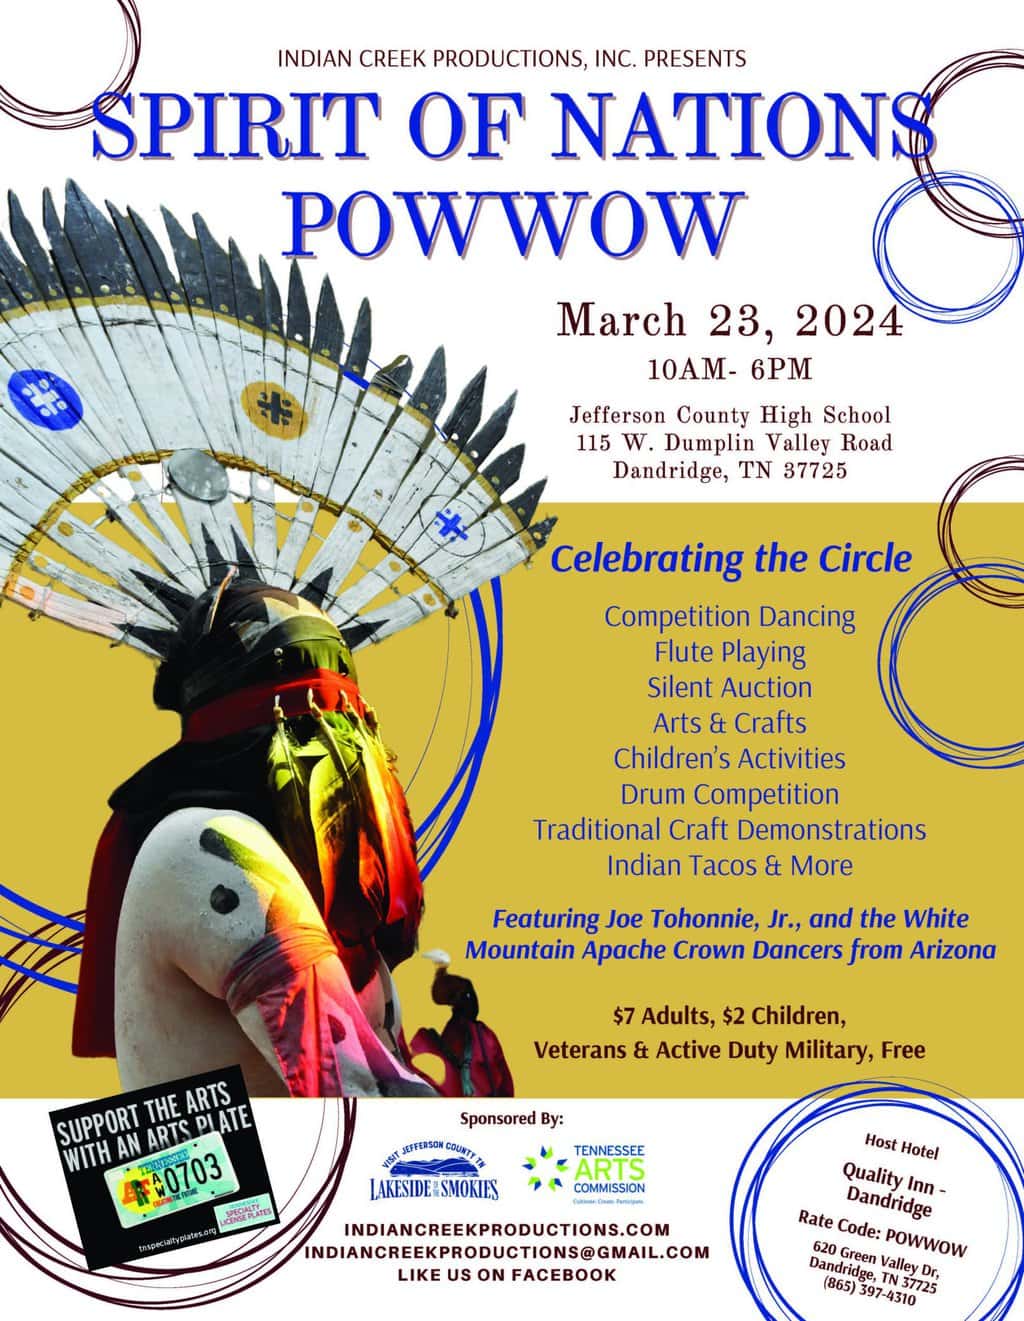 Spirit of Nations Pow Wow 2024